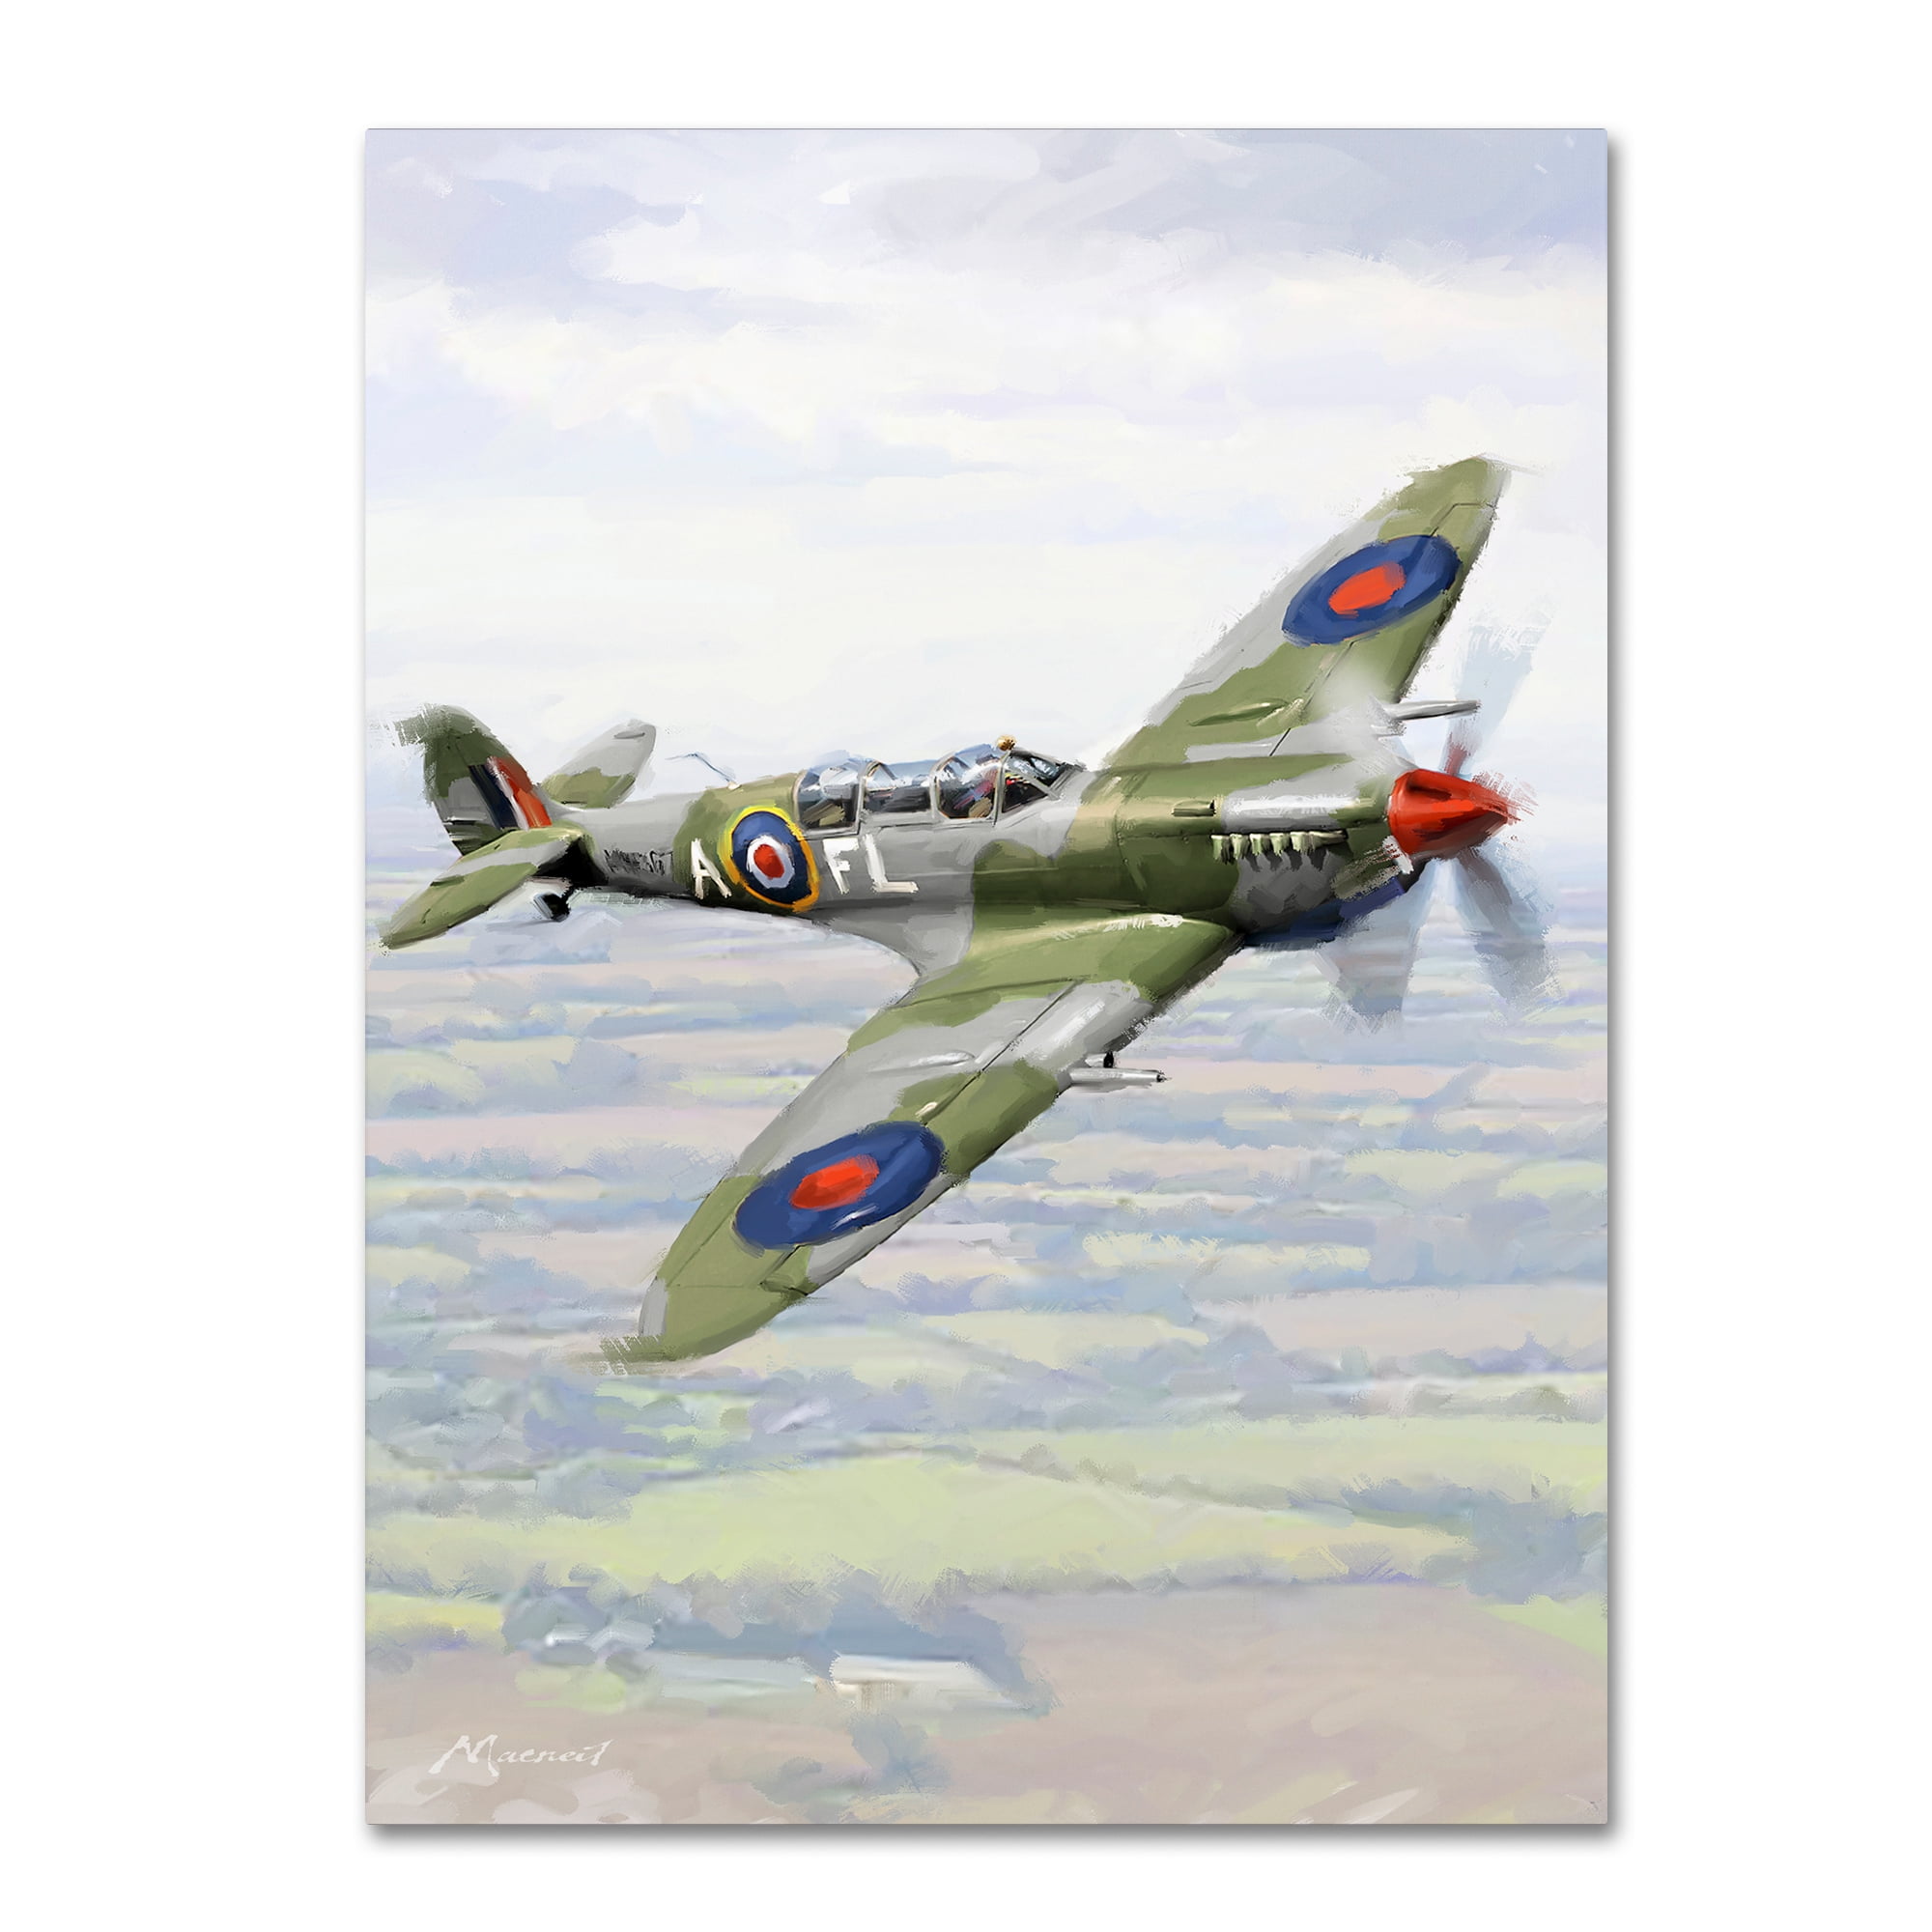 Flying Spitfire Airplane Aircraft Poster 5 Pcs Canvas Print Wall Art Home Decor 